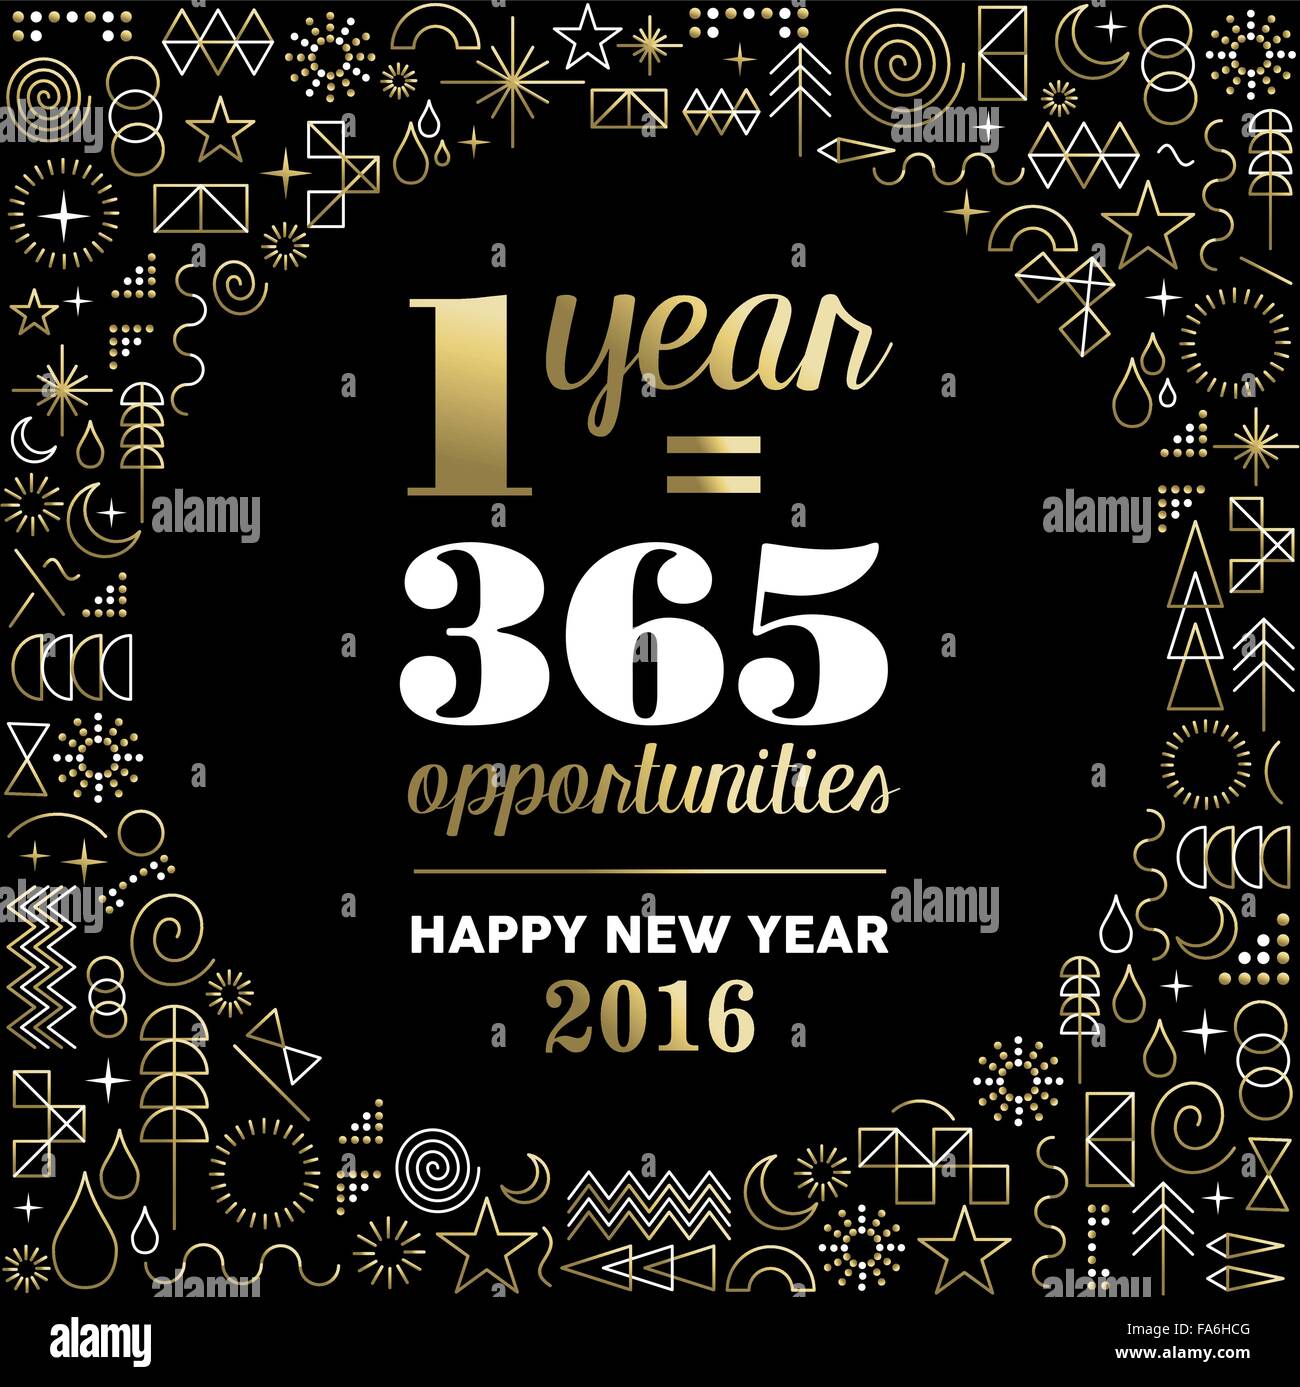 Happy new year 2016 inspiration quote poster with geometry element decoration background in gold color. EPS10 vector. Stock Vector